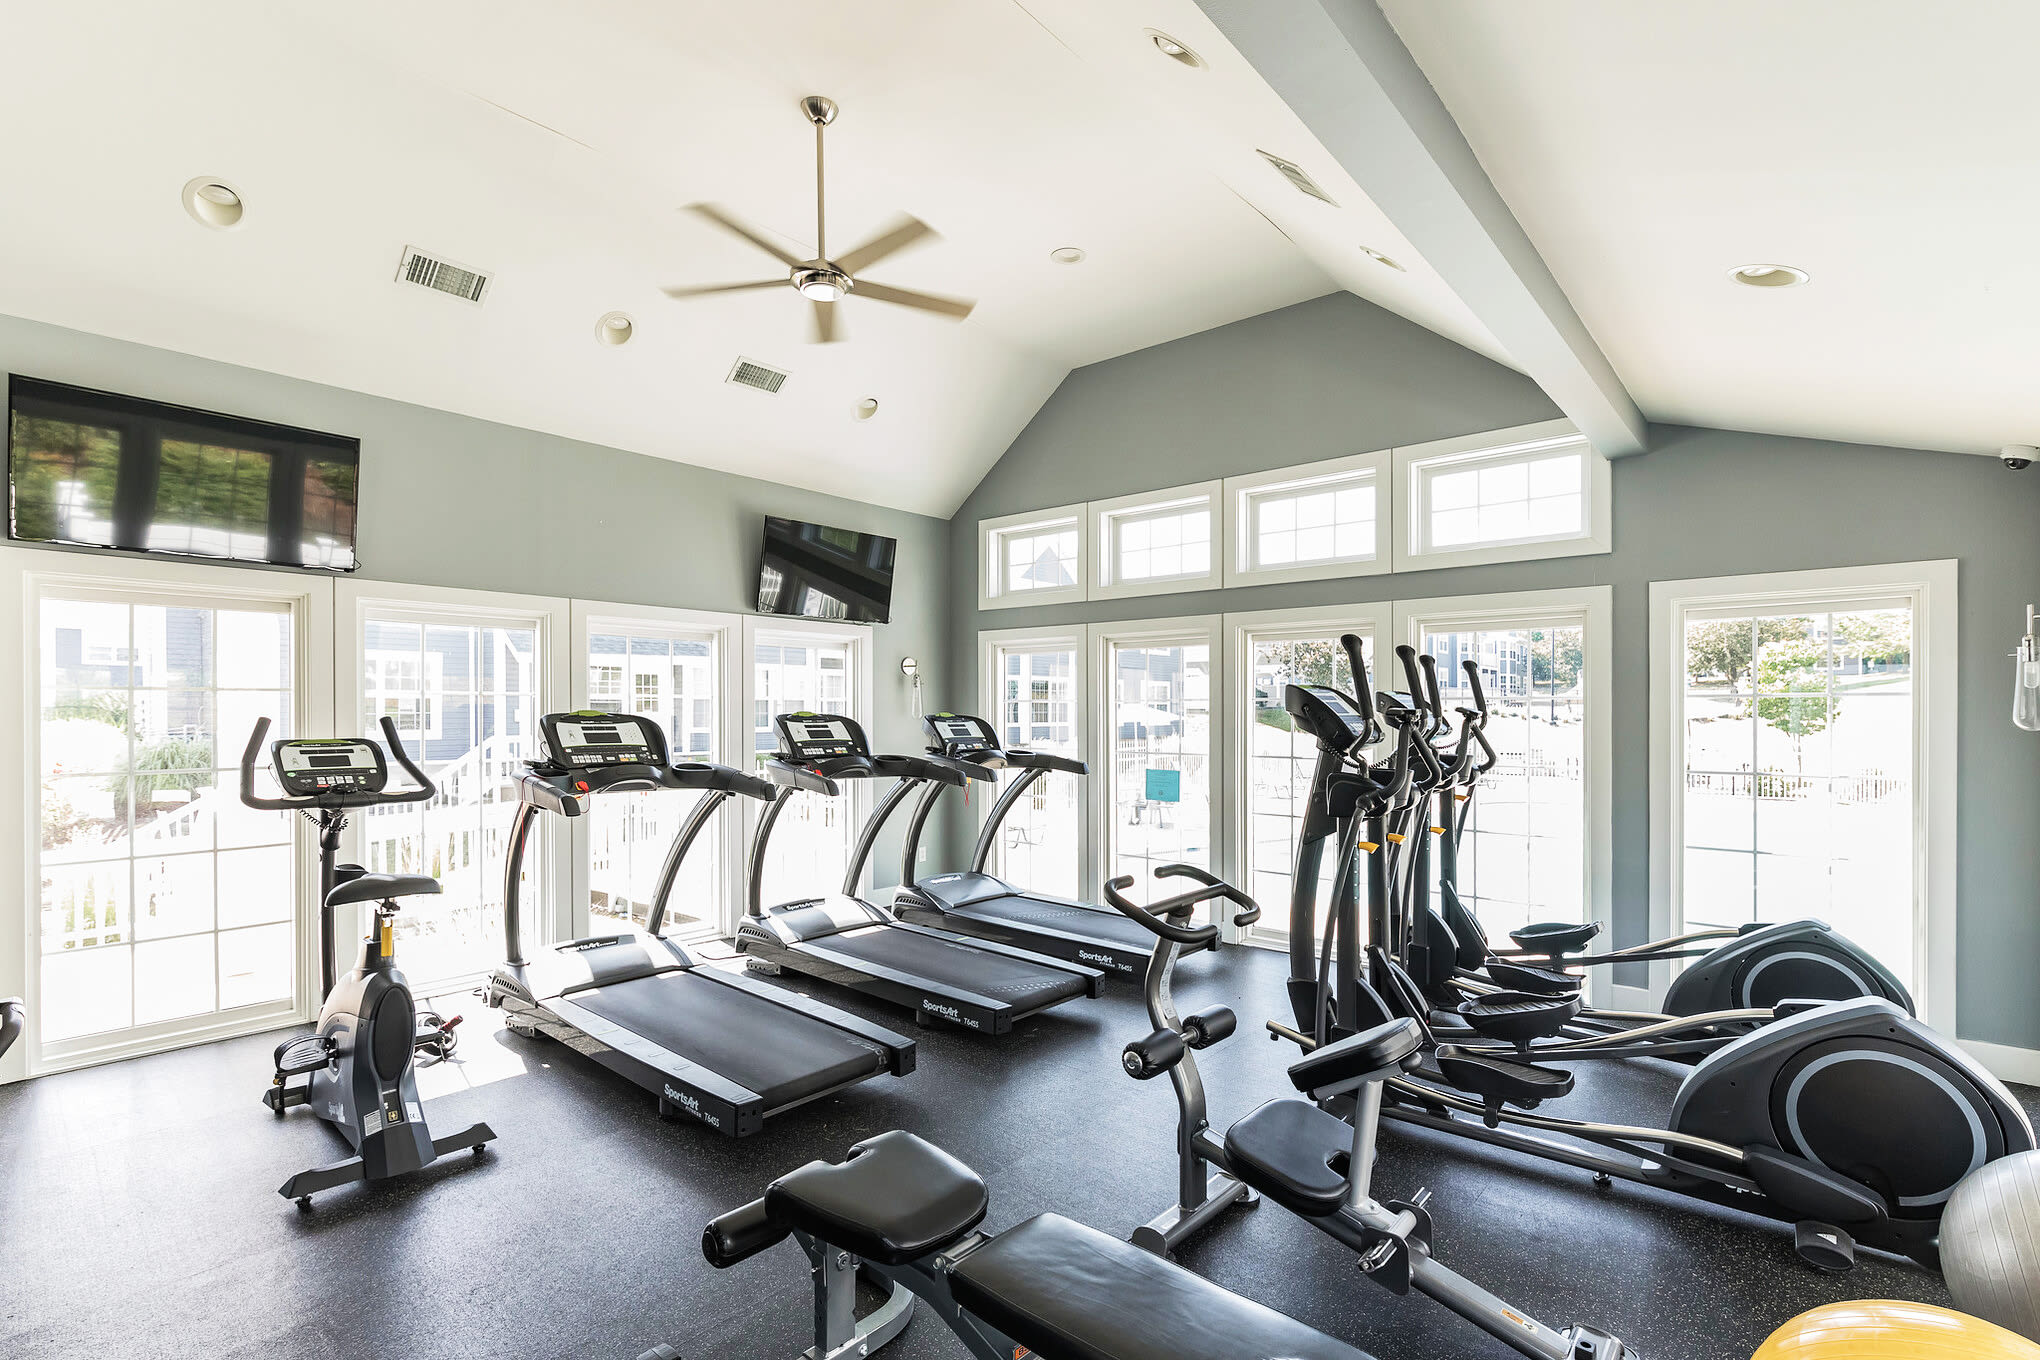 Our Modern Apartments in East Haven, Connecticut showcase a Fitness Center